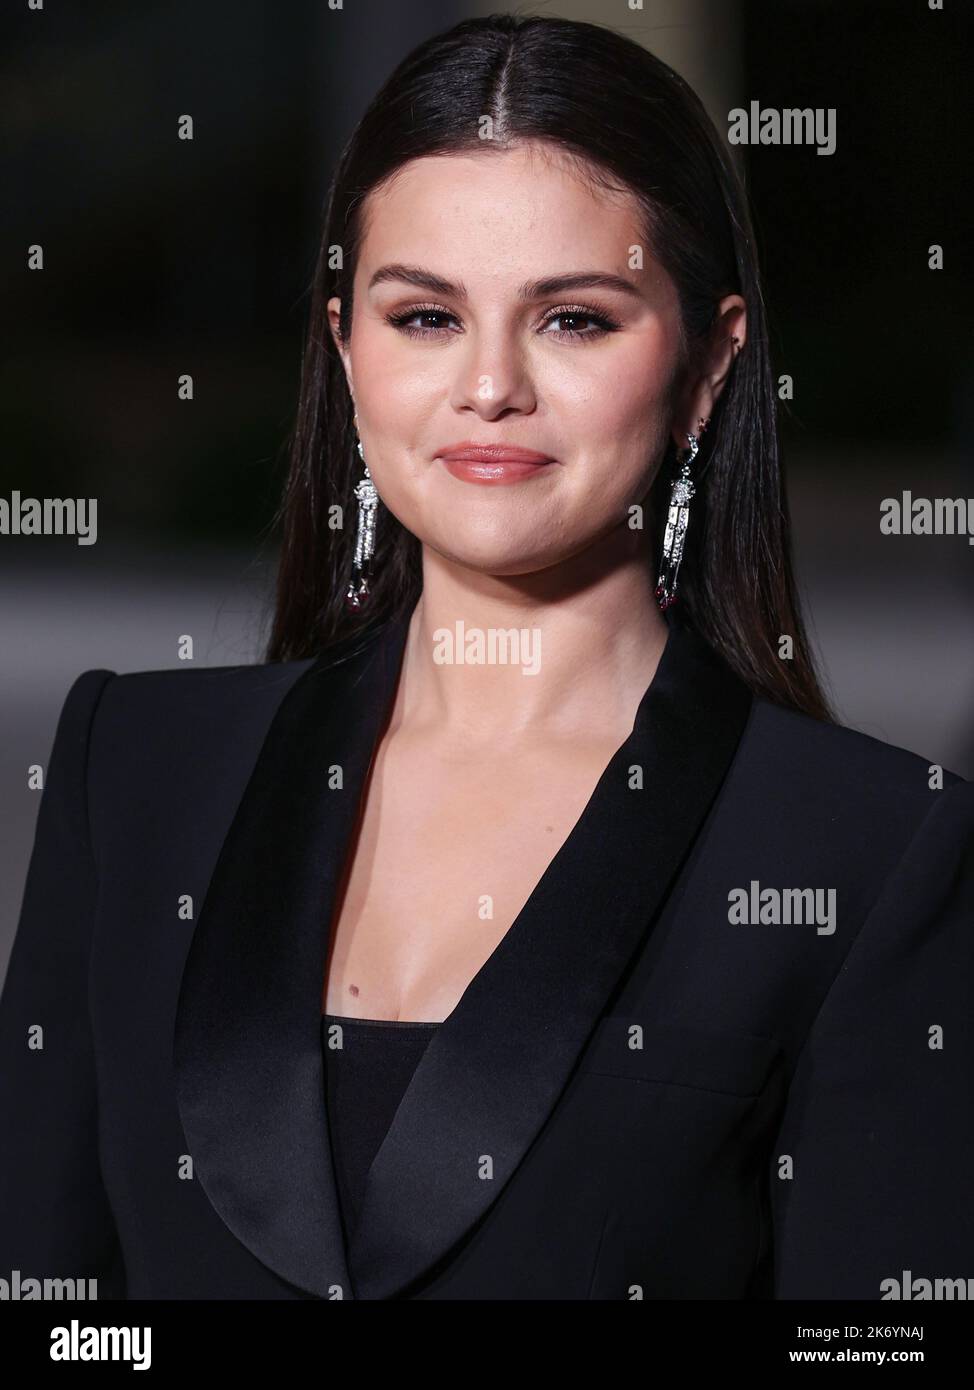 LOS ANGELES, CALIFORNIA, USA - OCTOBER 15: Selena Gomez arrives at the 2nd Annual Academy Museum of Motion Pictures Gala presented by Rolex held at the Academy Museum of Motion Pictures on October 15, 2022 in Los Angeles, California, United States. (Photo by Xavier Collin/Image Press Agency) Stock Photo